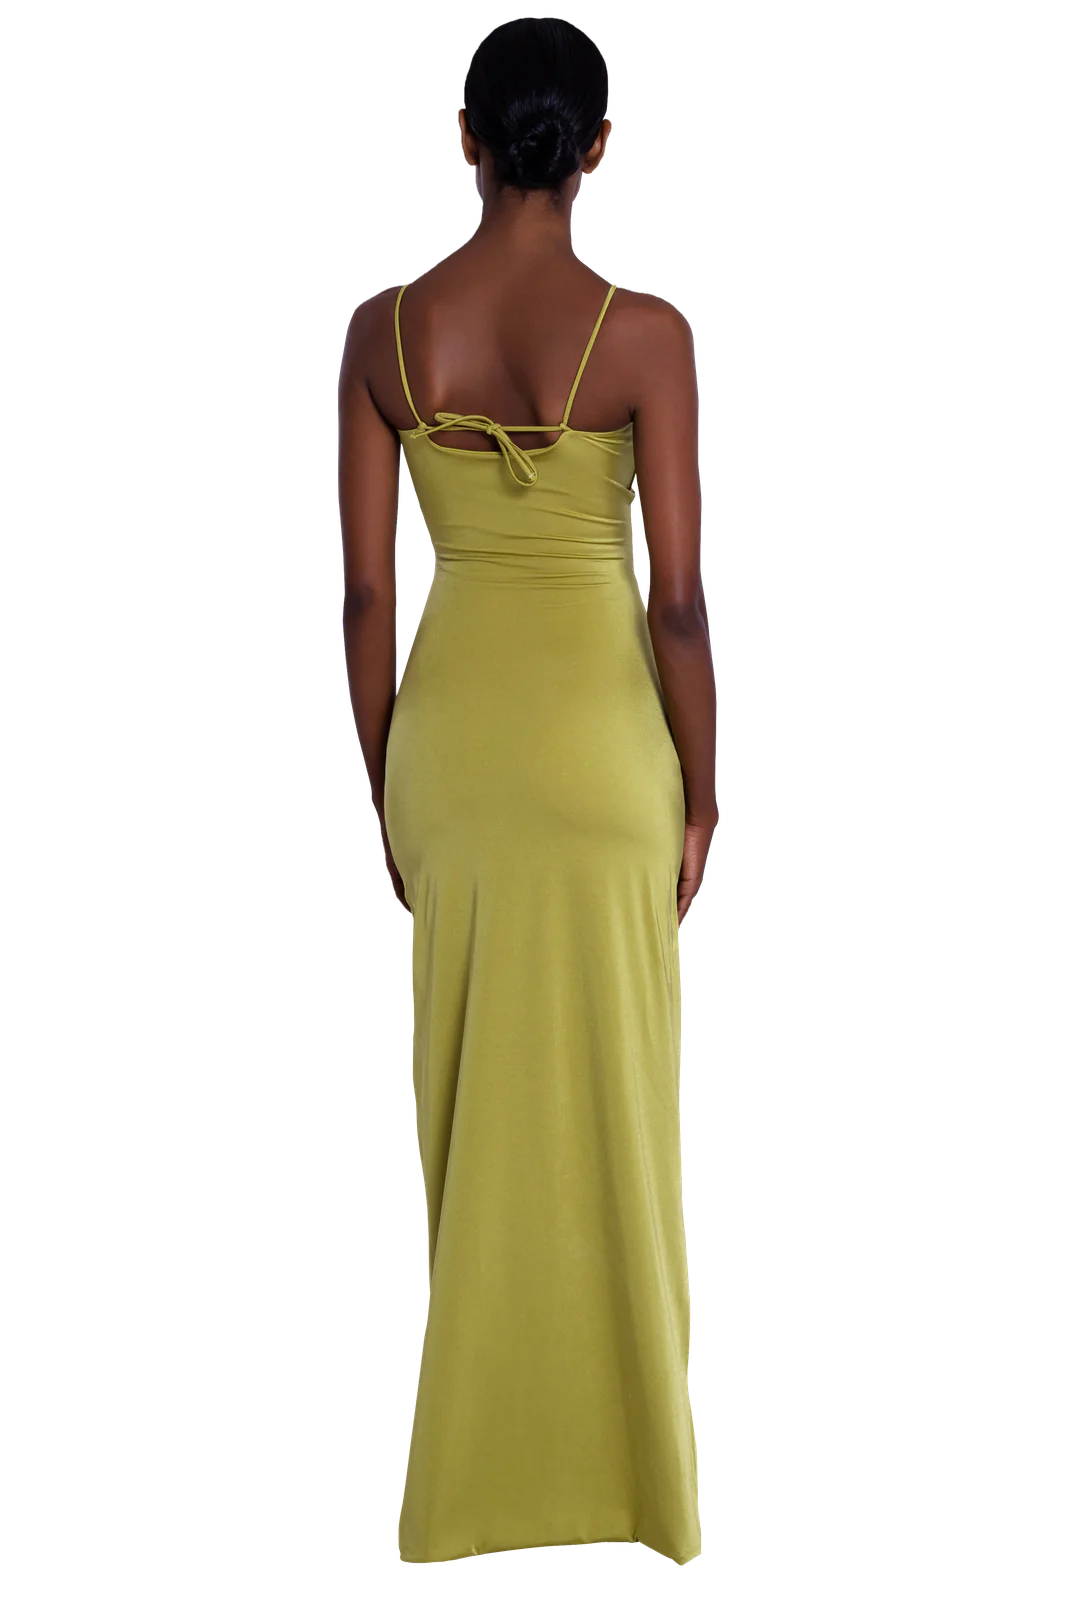 Maygel Coronel Veranera Dress in Pascolo Green available at The New Trend Australia.